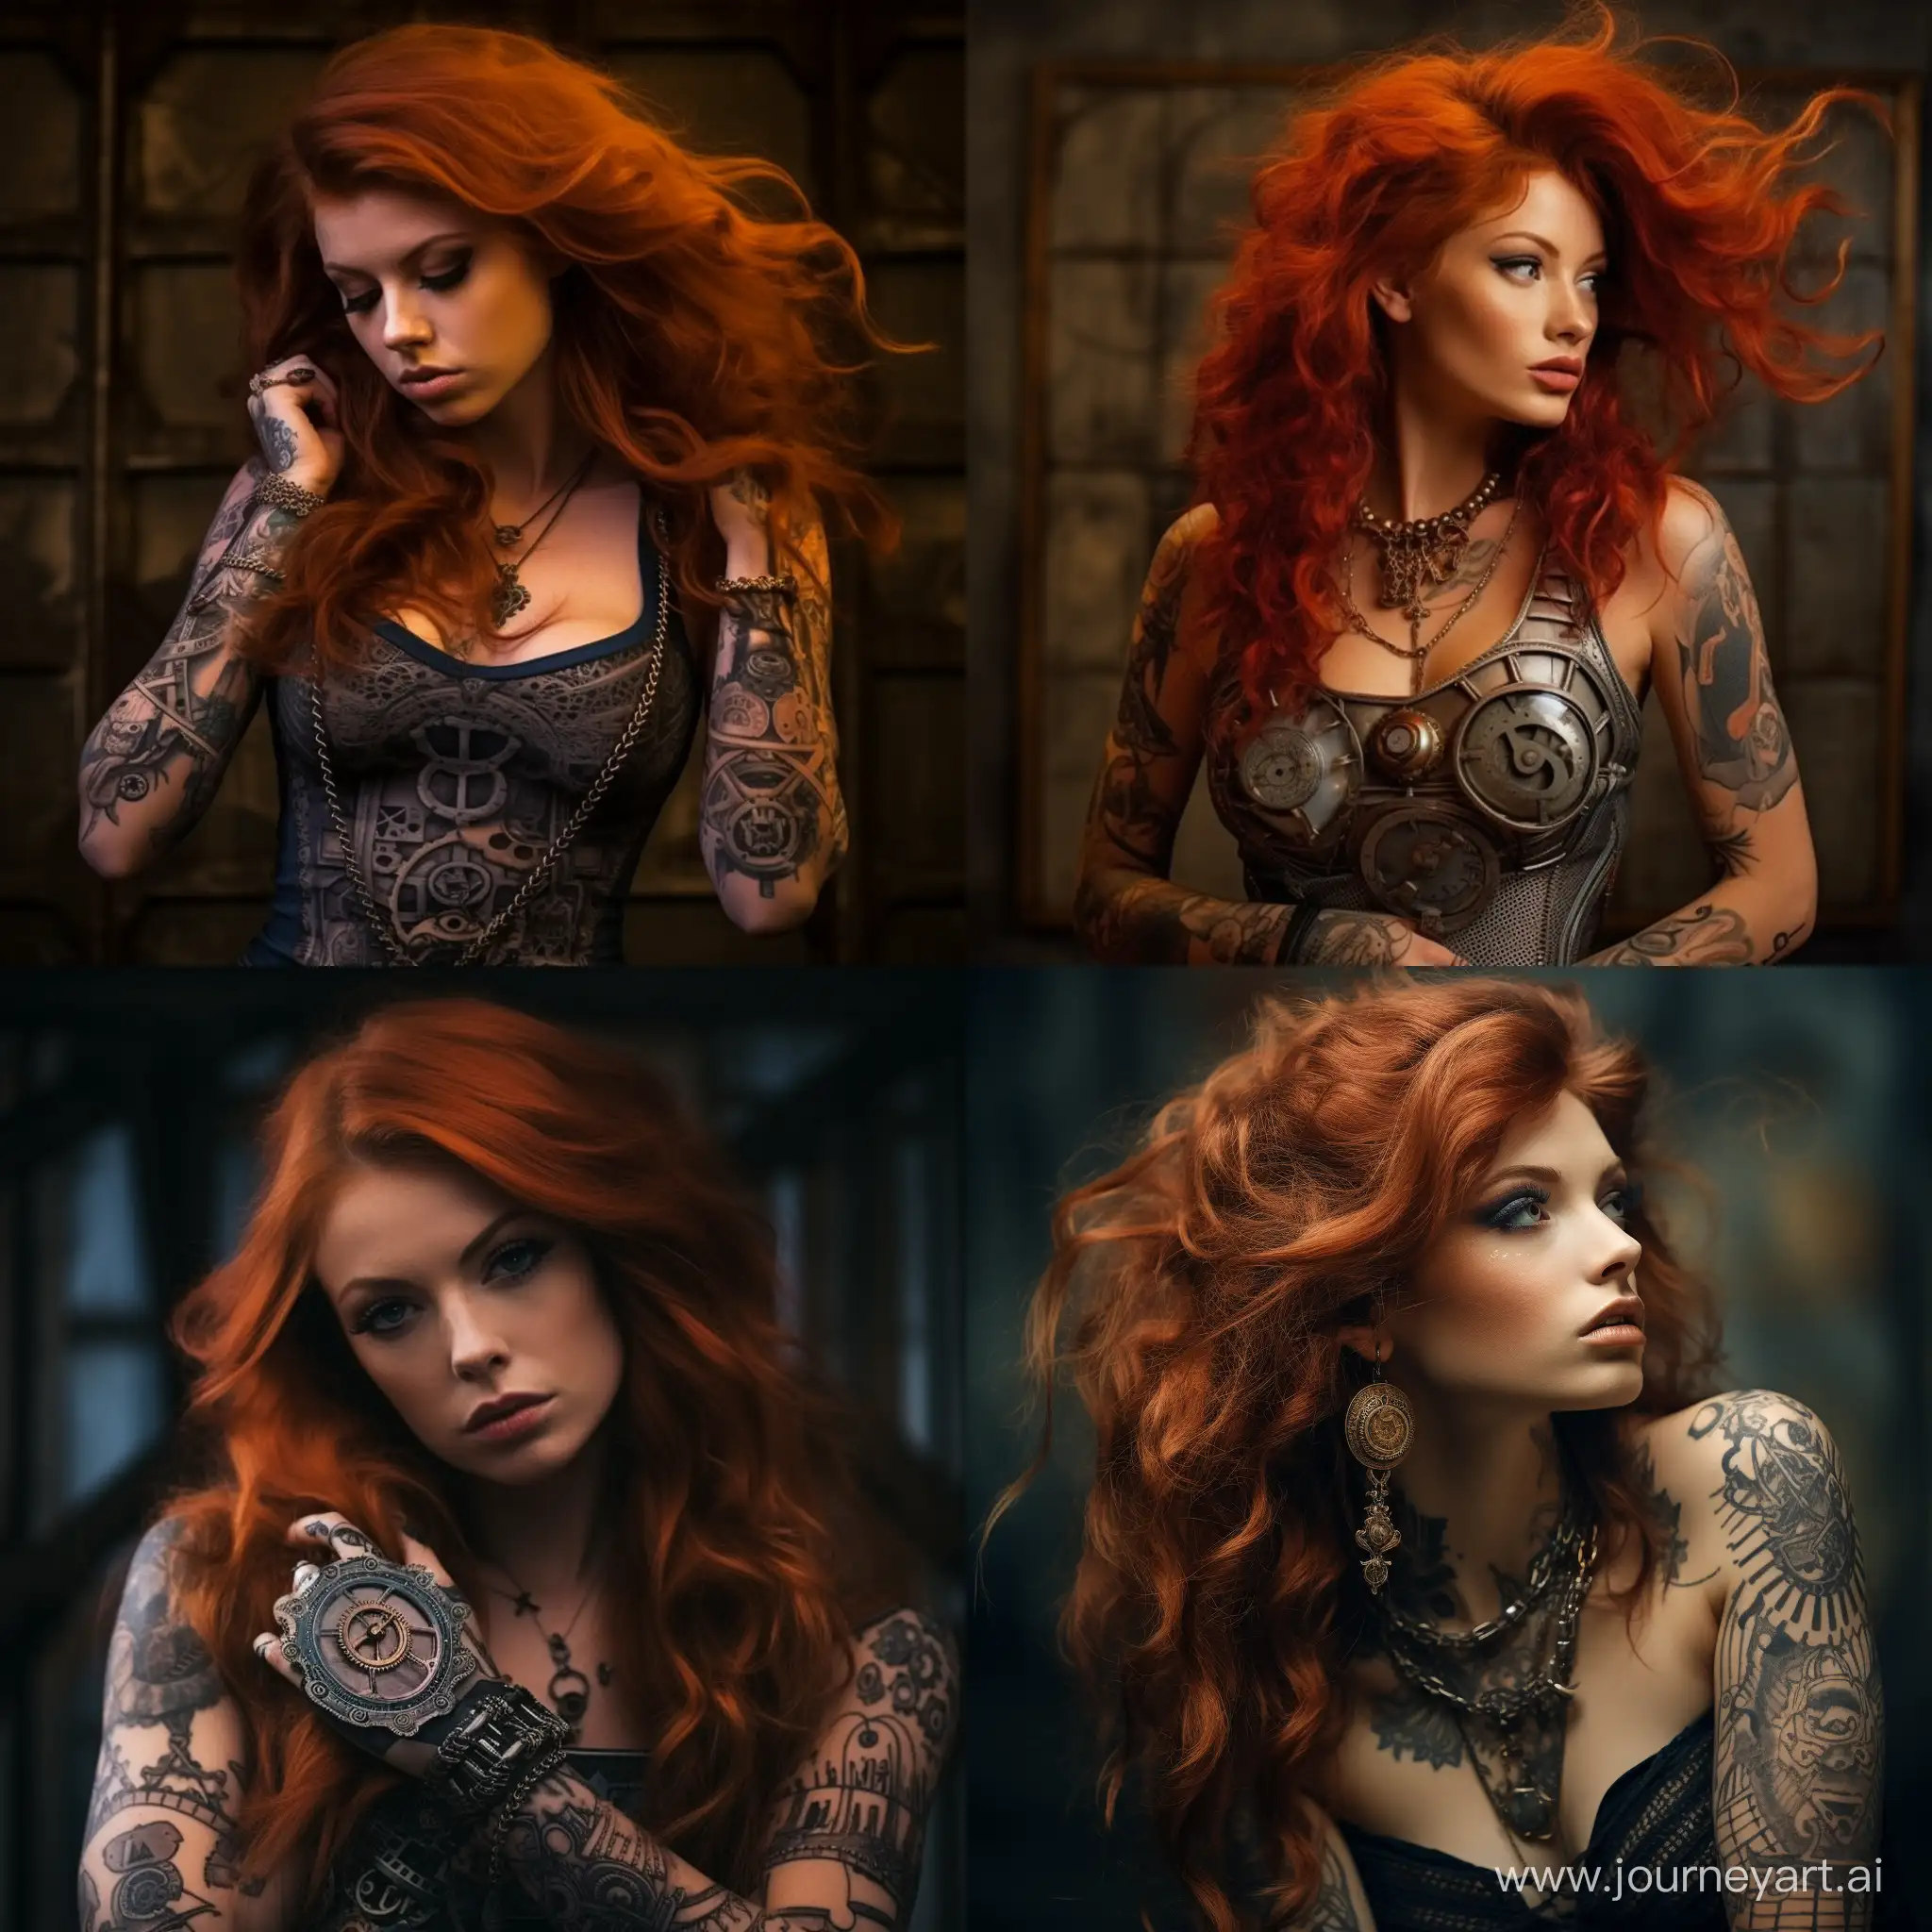 Steampunk-Redhead-with-Intricate-Tattoos-in-a-Vibrant-Portrait